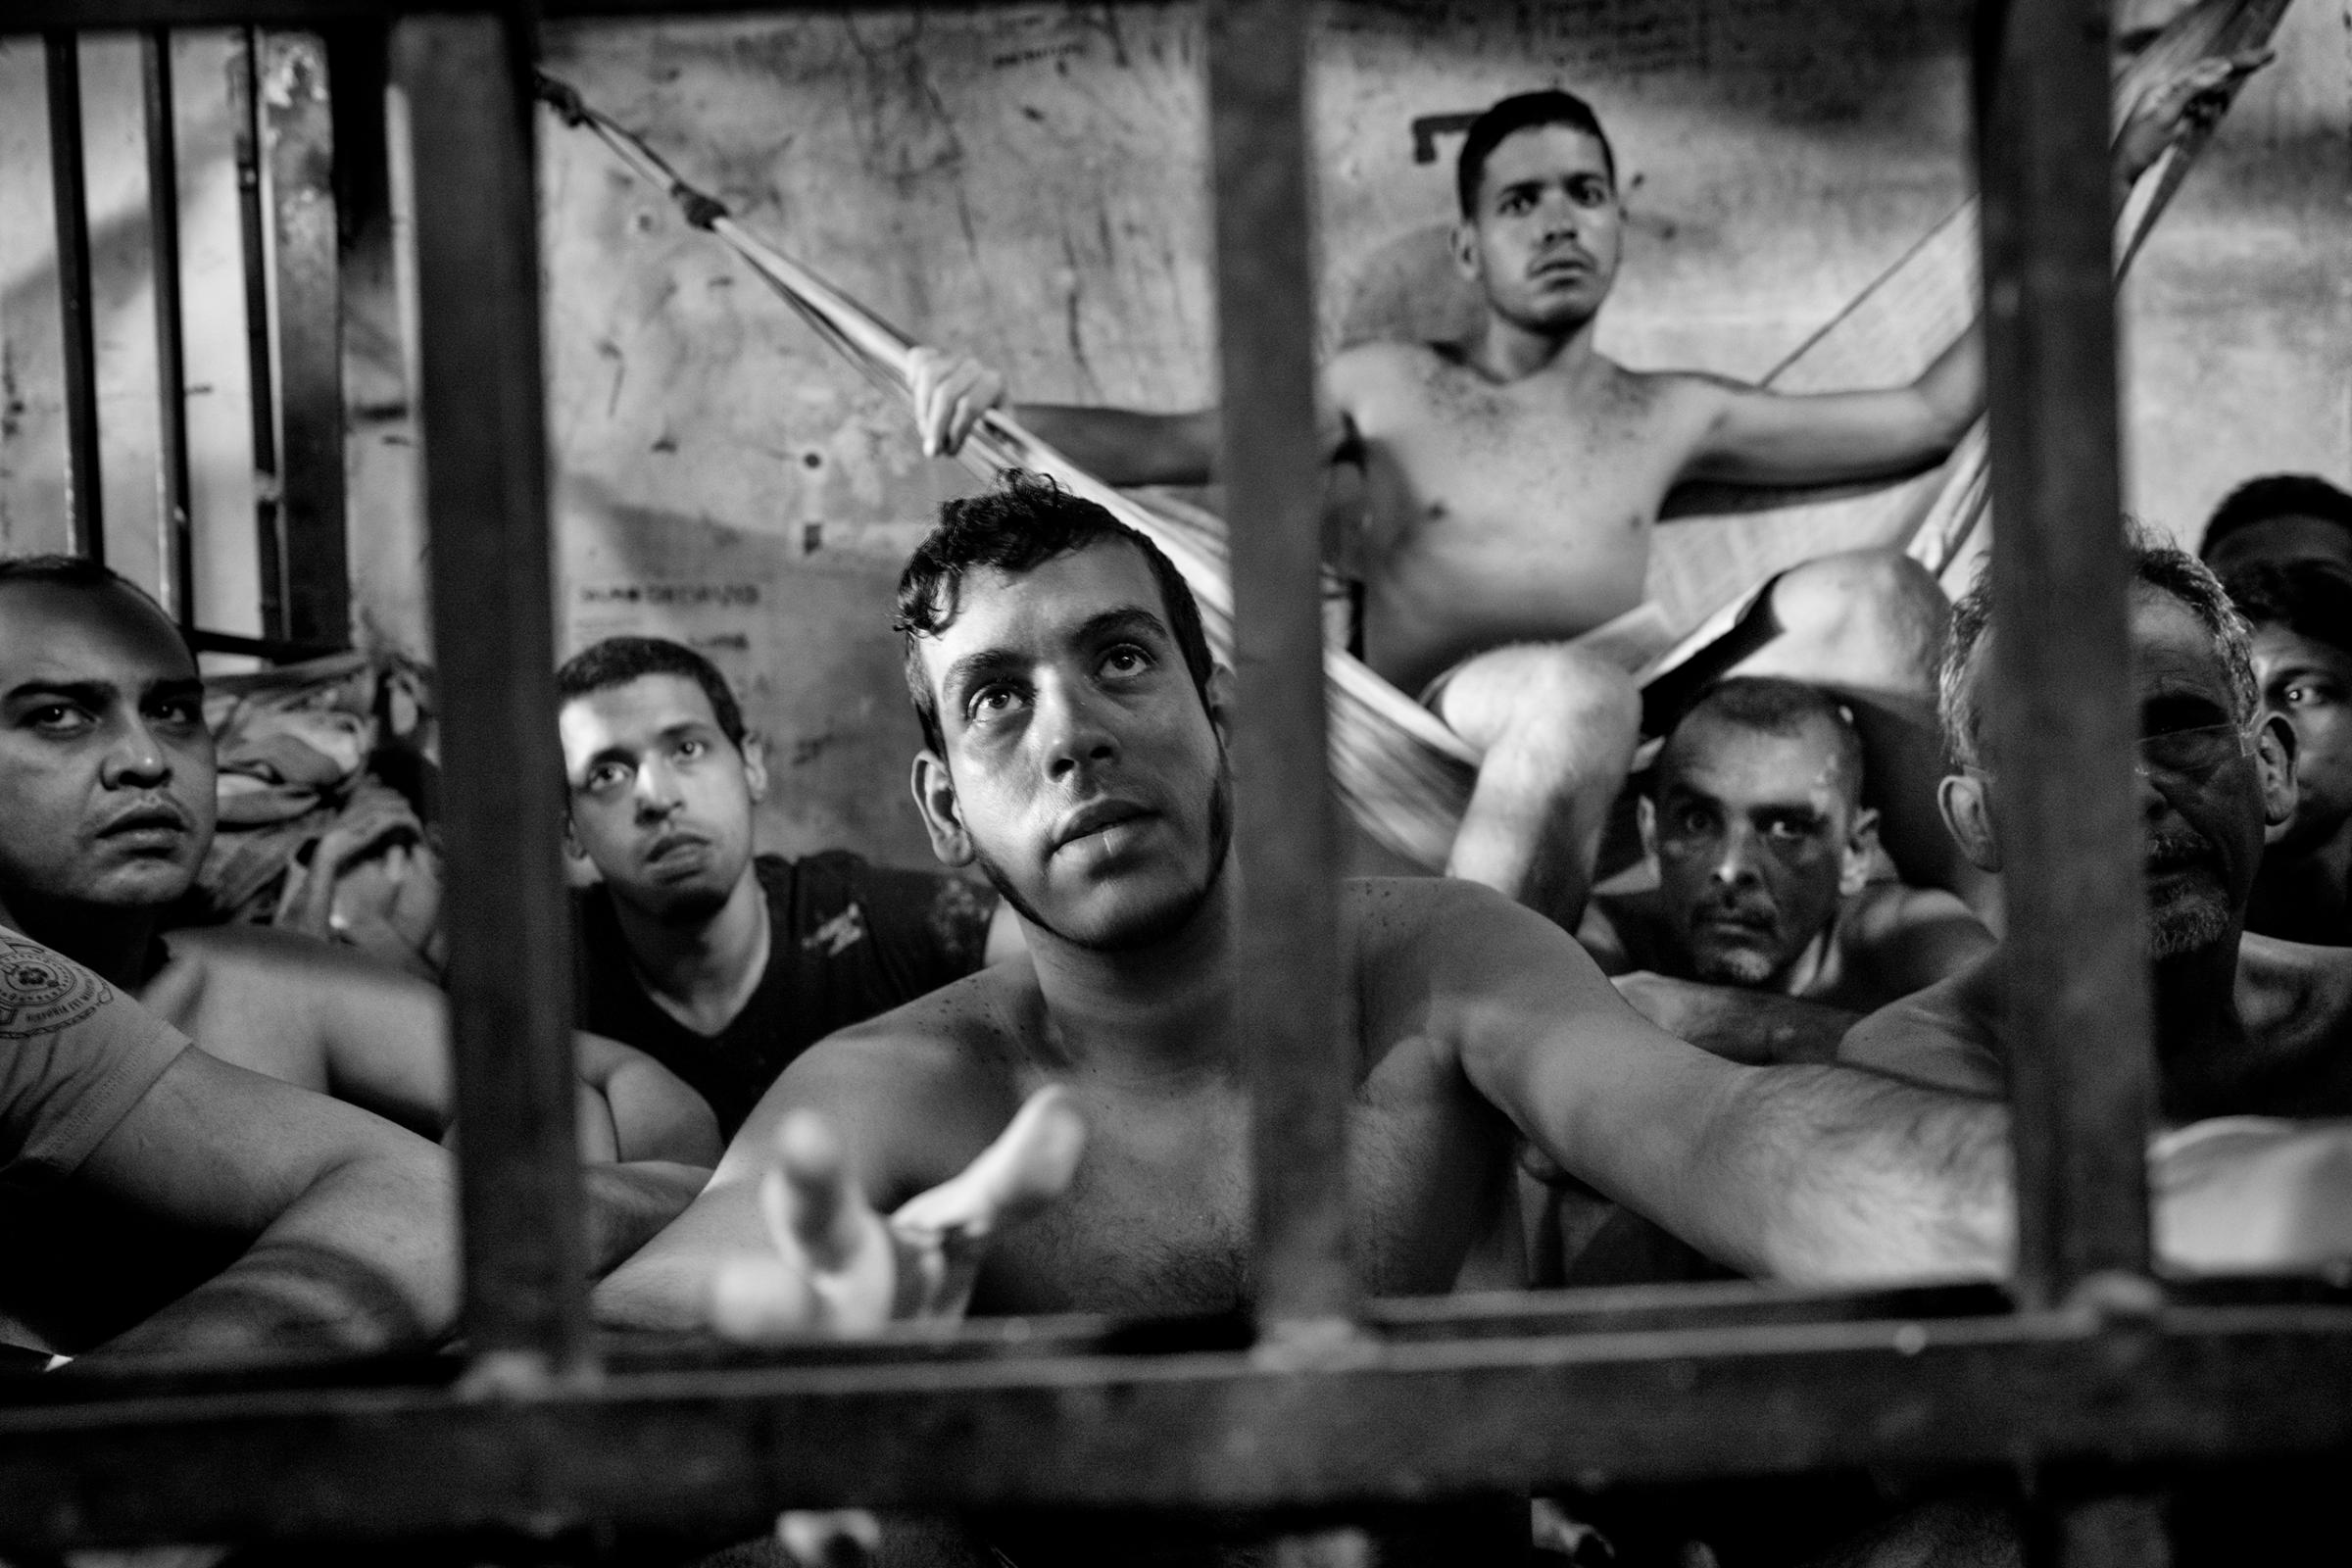 A group of prisoners sit in their cells inside the municipal police station of Chacao, located east of Caracas, Venezuela, May 27, 2016.